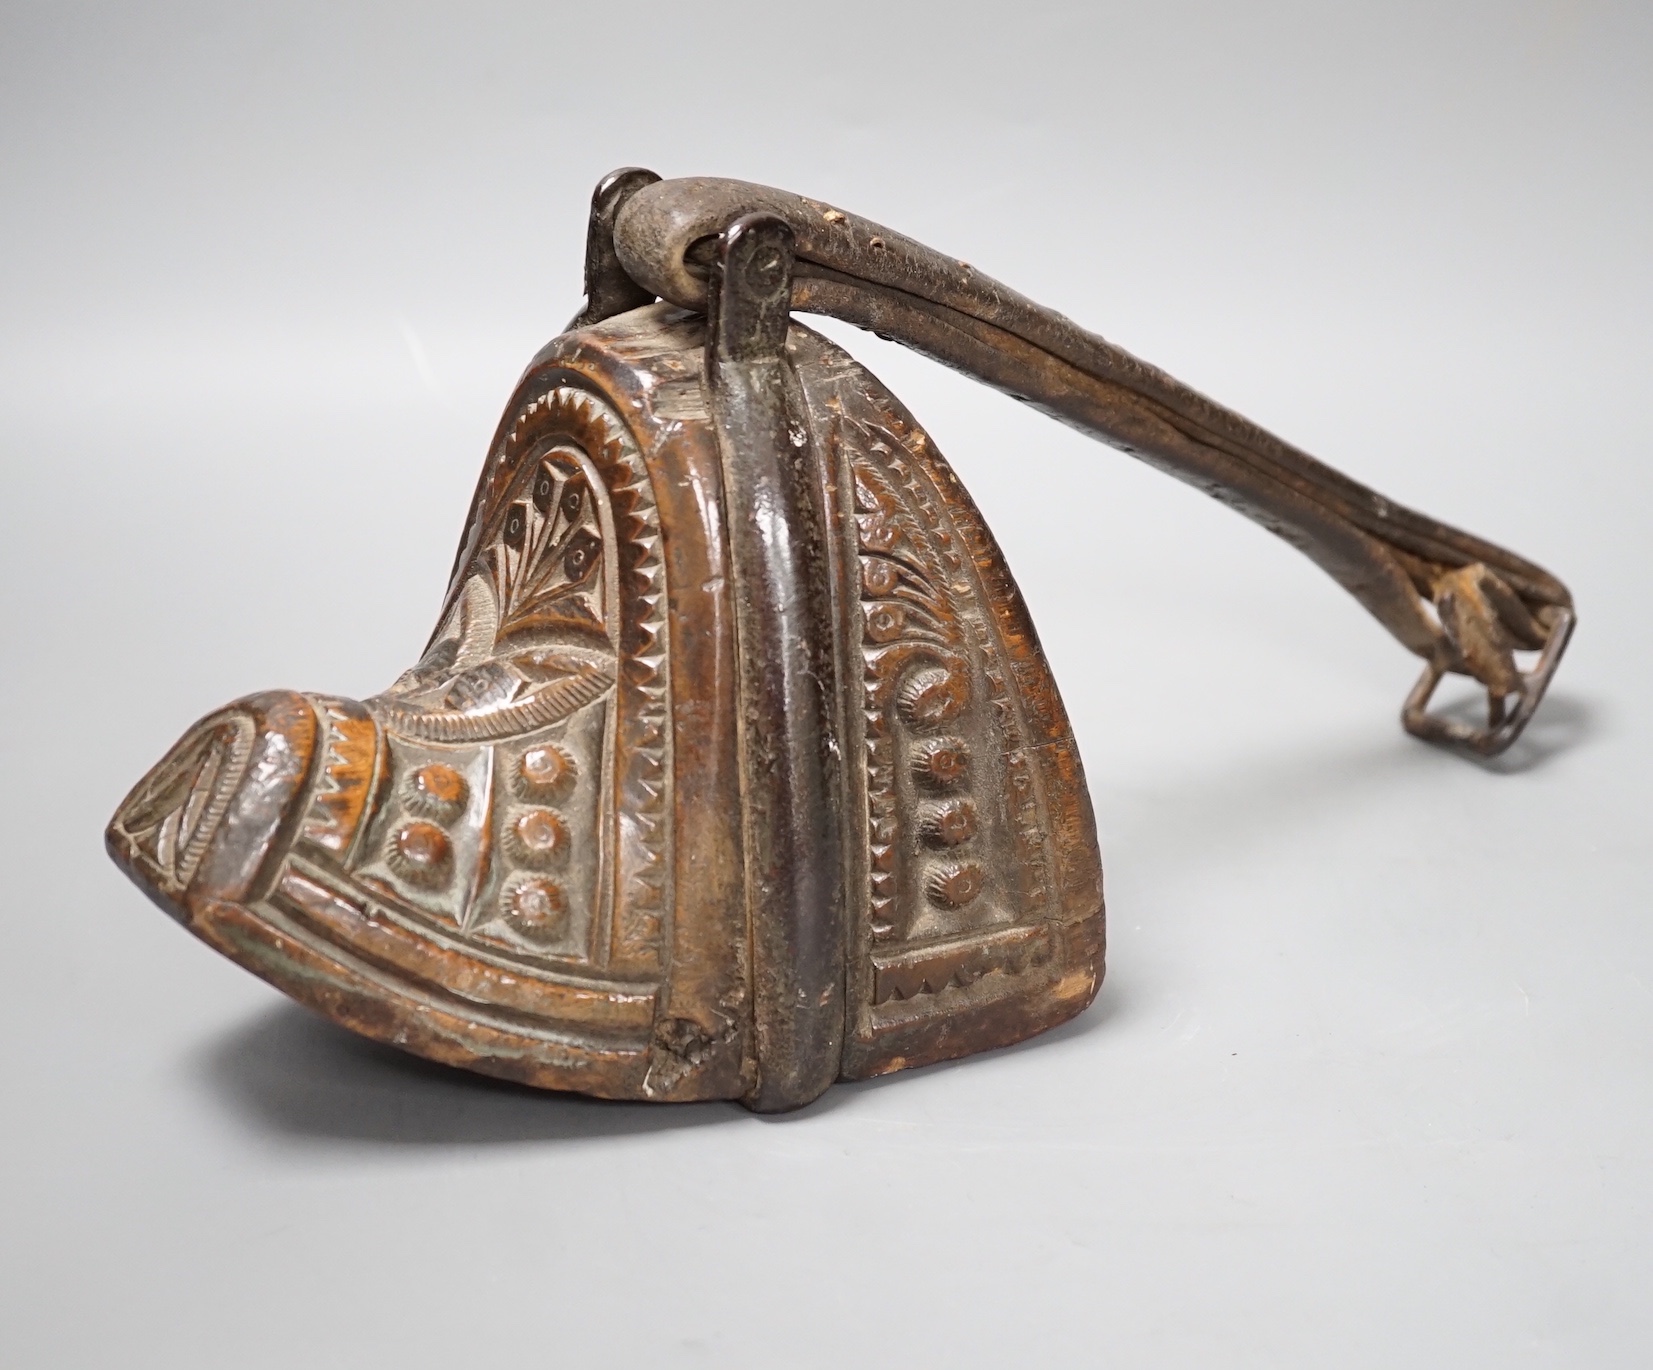 A 19th century Mongolian carved wood and bronze stirrup shoe